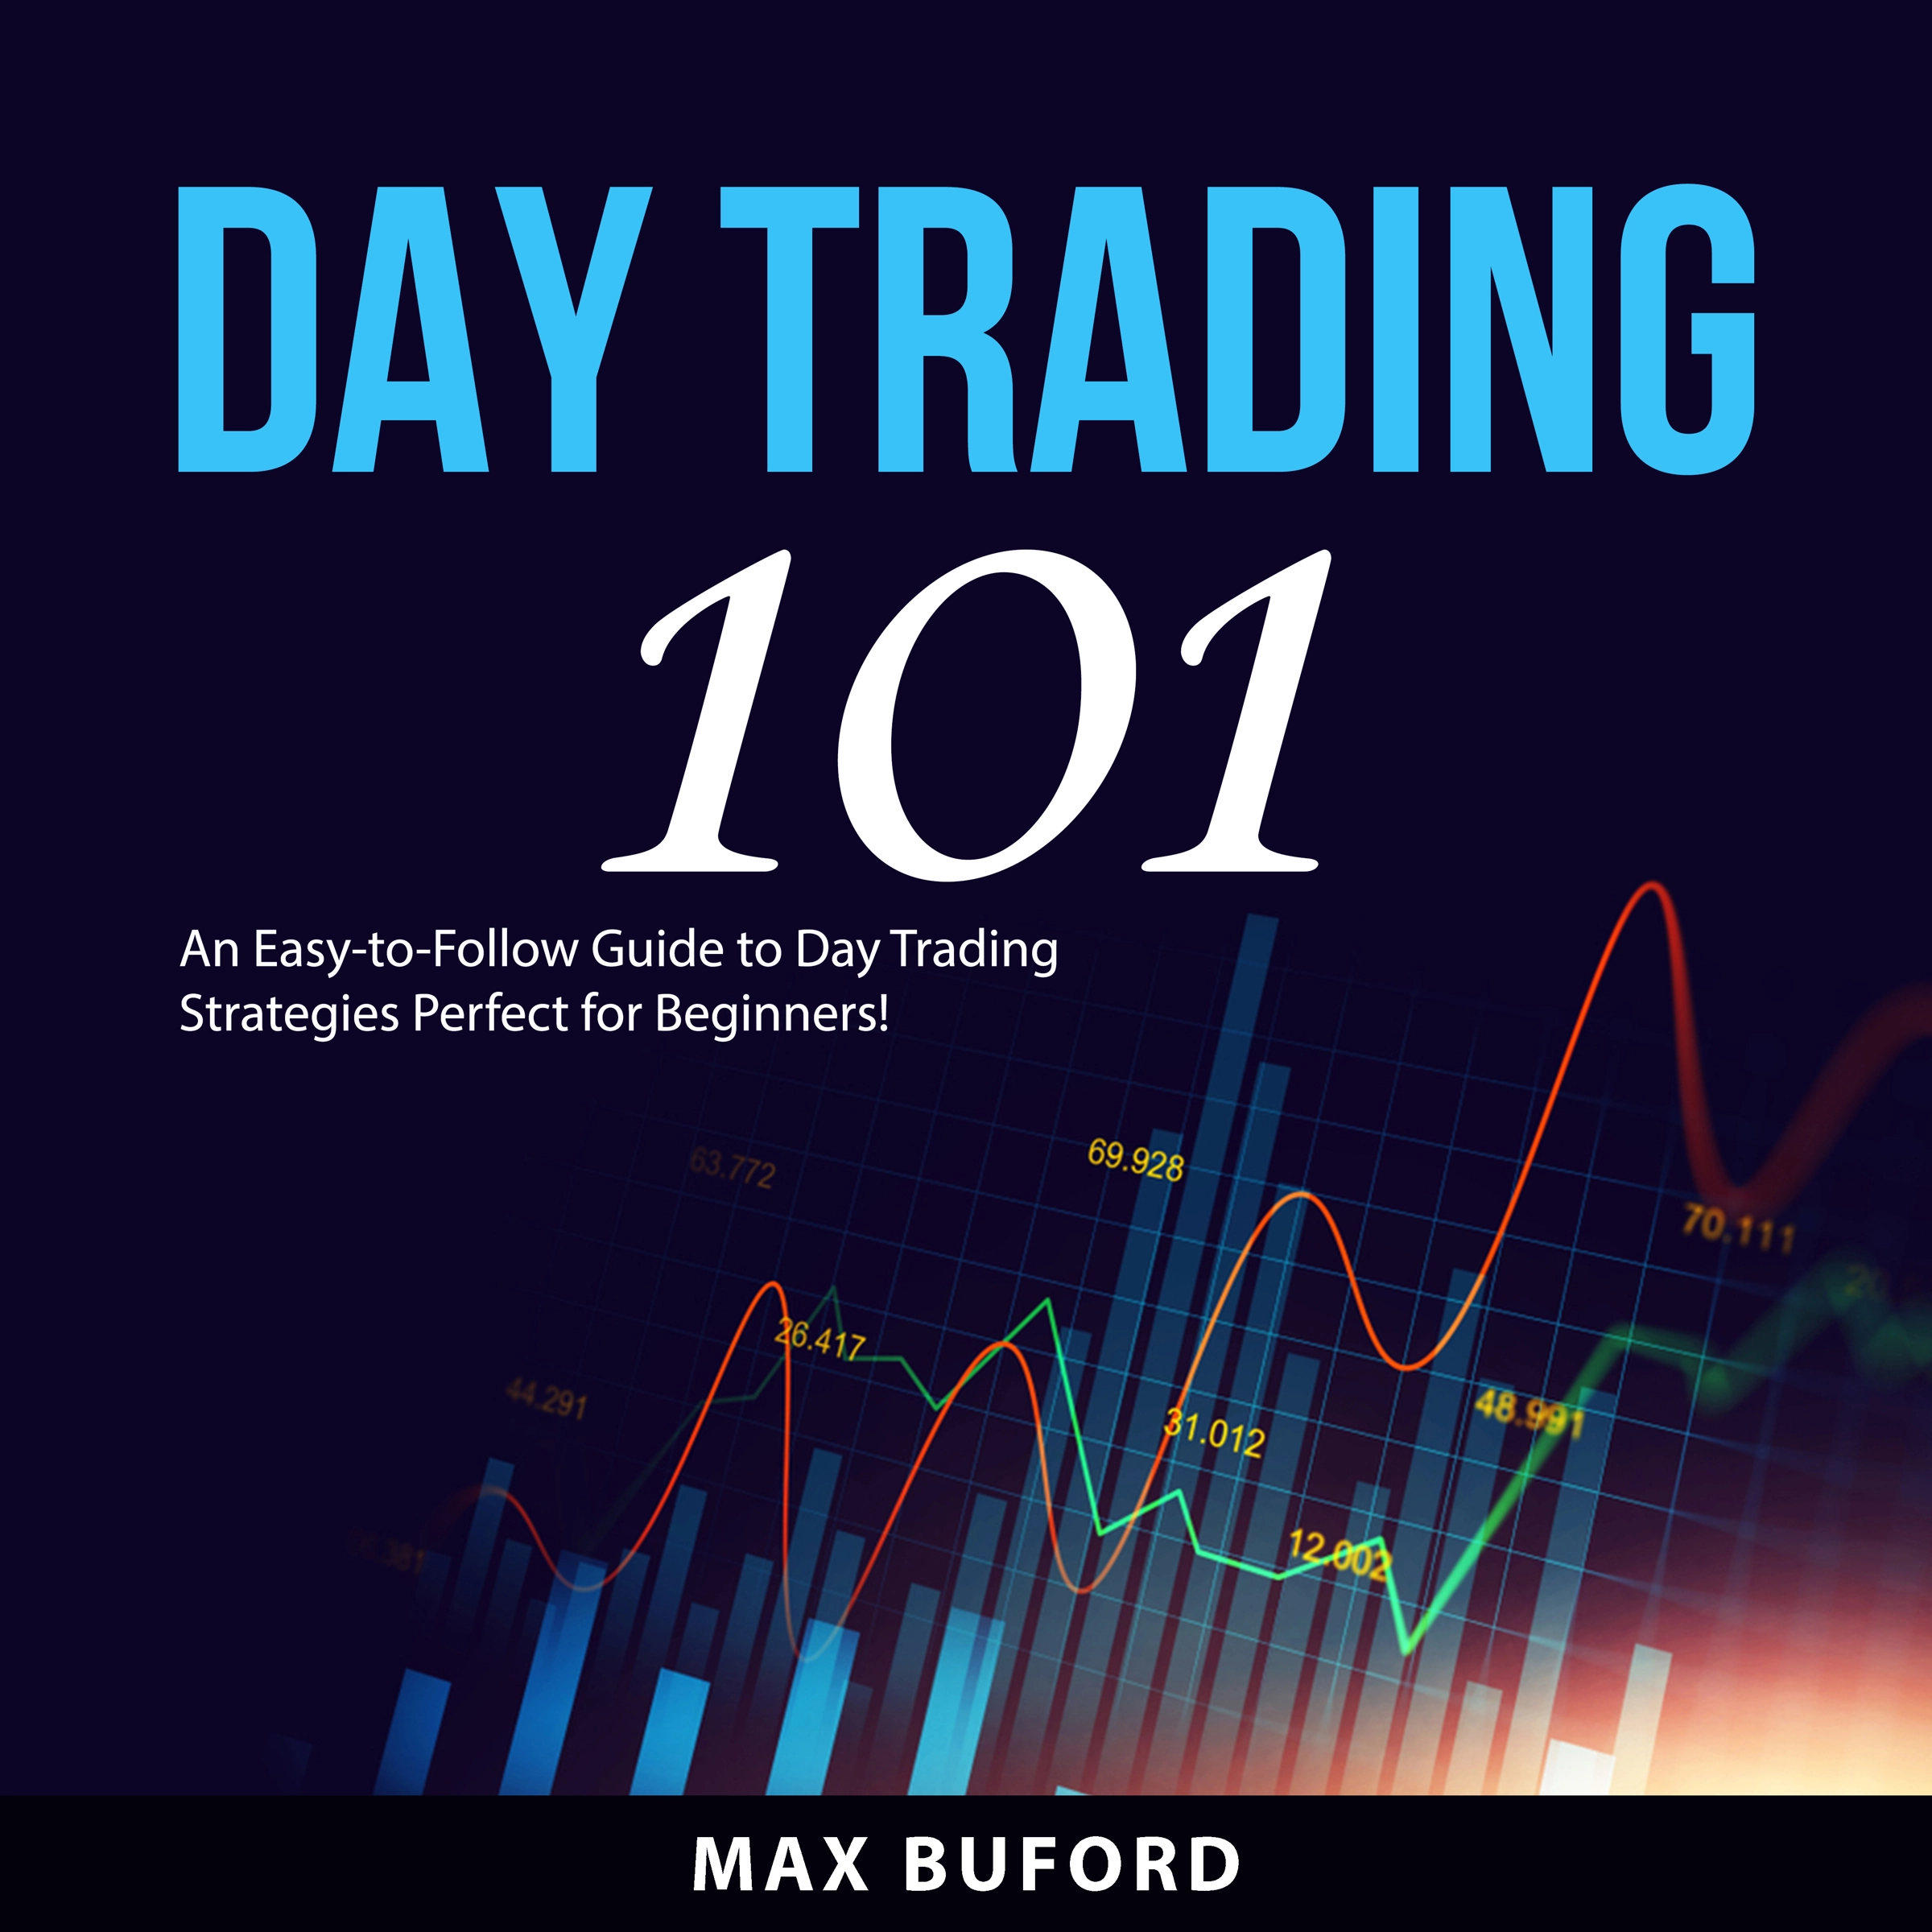 Day Trading 101 by Max Buford Audiobook